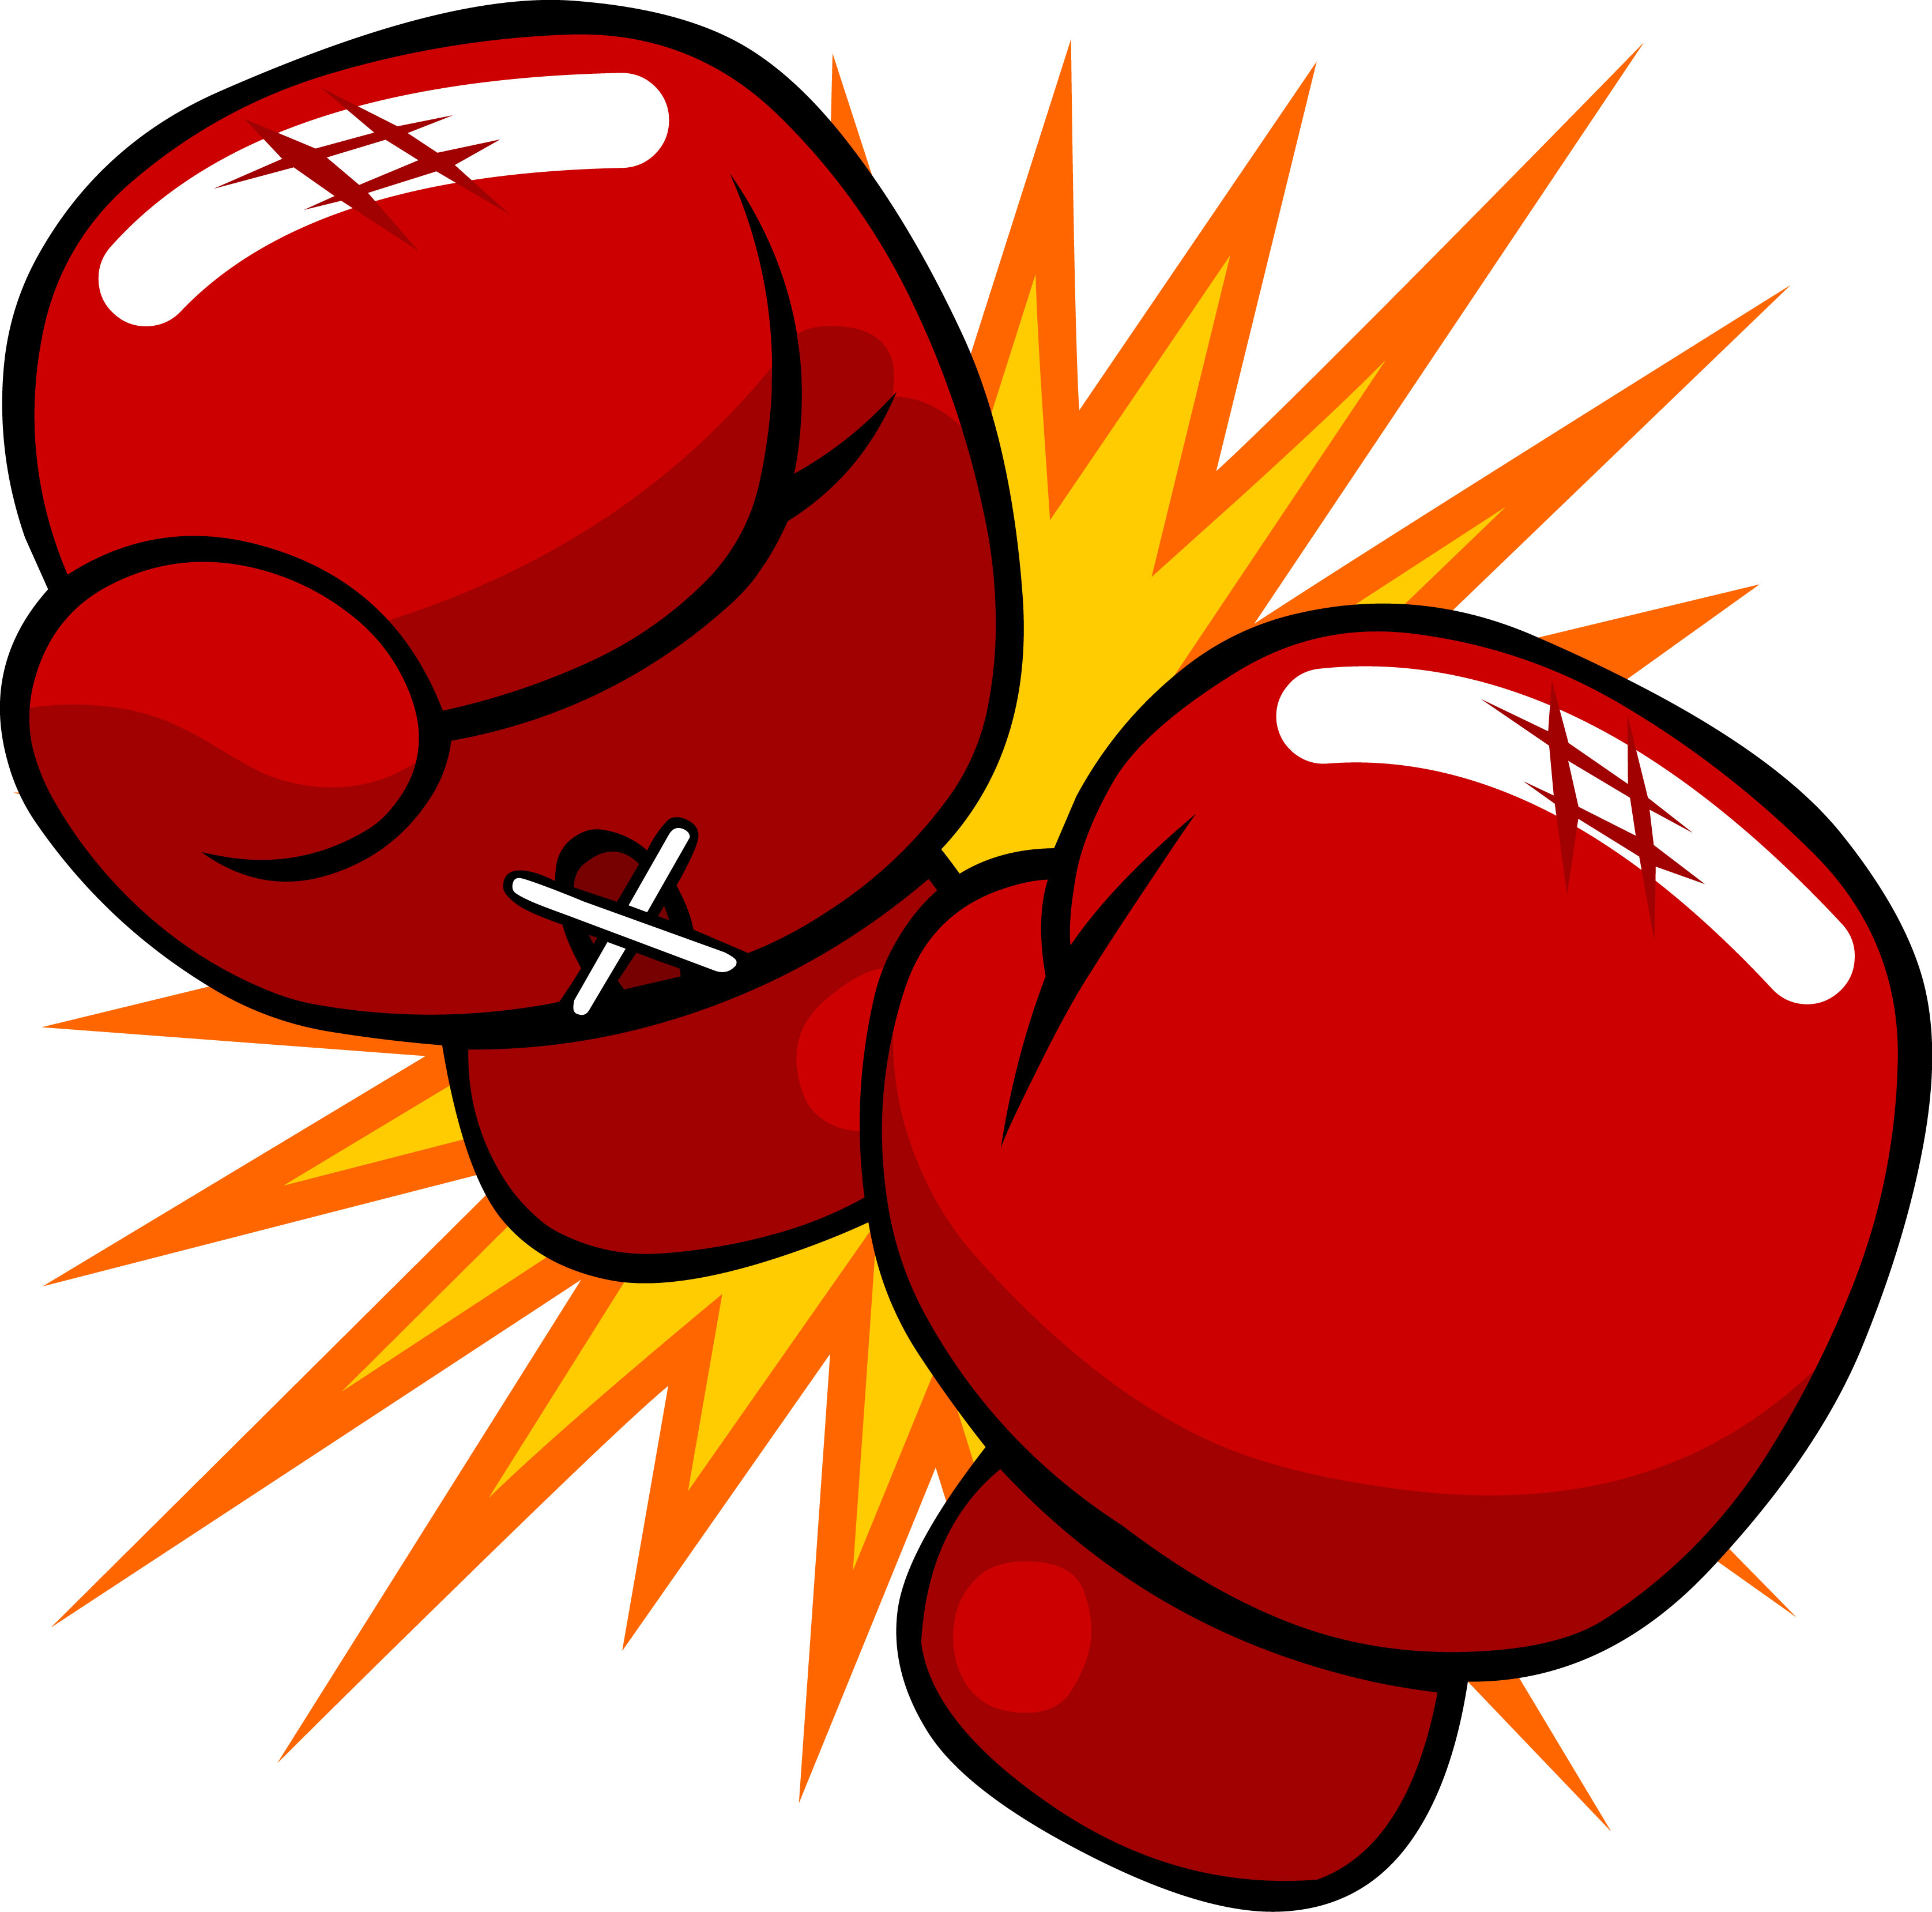 boxing knockout punches